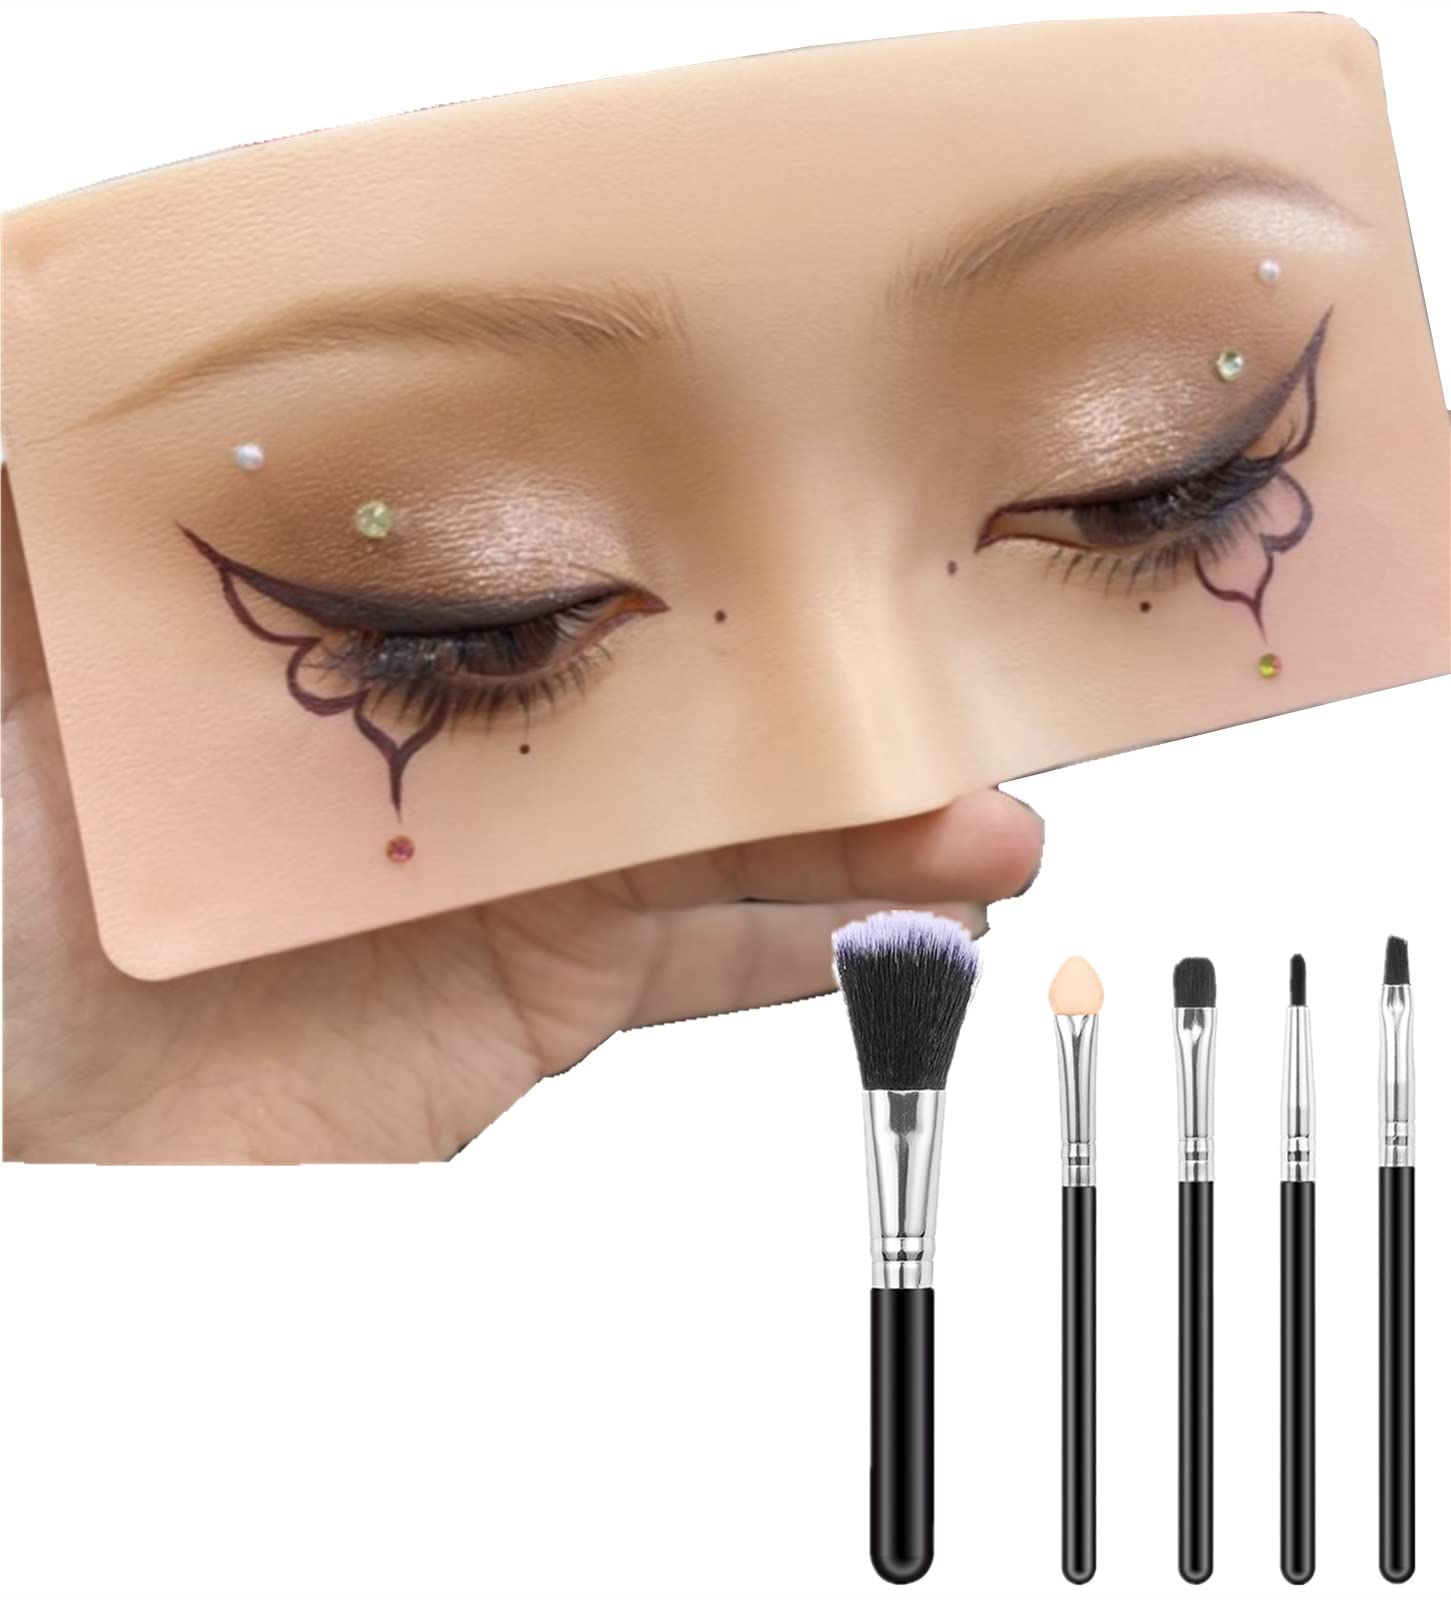  The Perfect Aid to Practicing Makeup - Lash Mannequin Head, Mannequin  Head for Makeup Practice, Face Eyes Makeup Mannequin Silicone False  Cosmetologist for Makeup Practice Training : Beauty & Personal Care